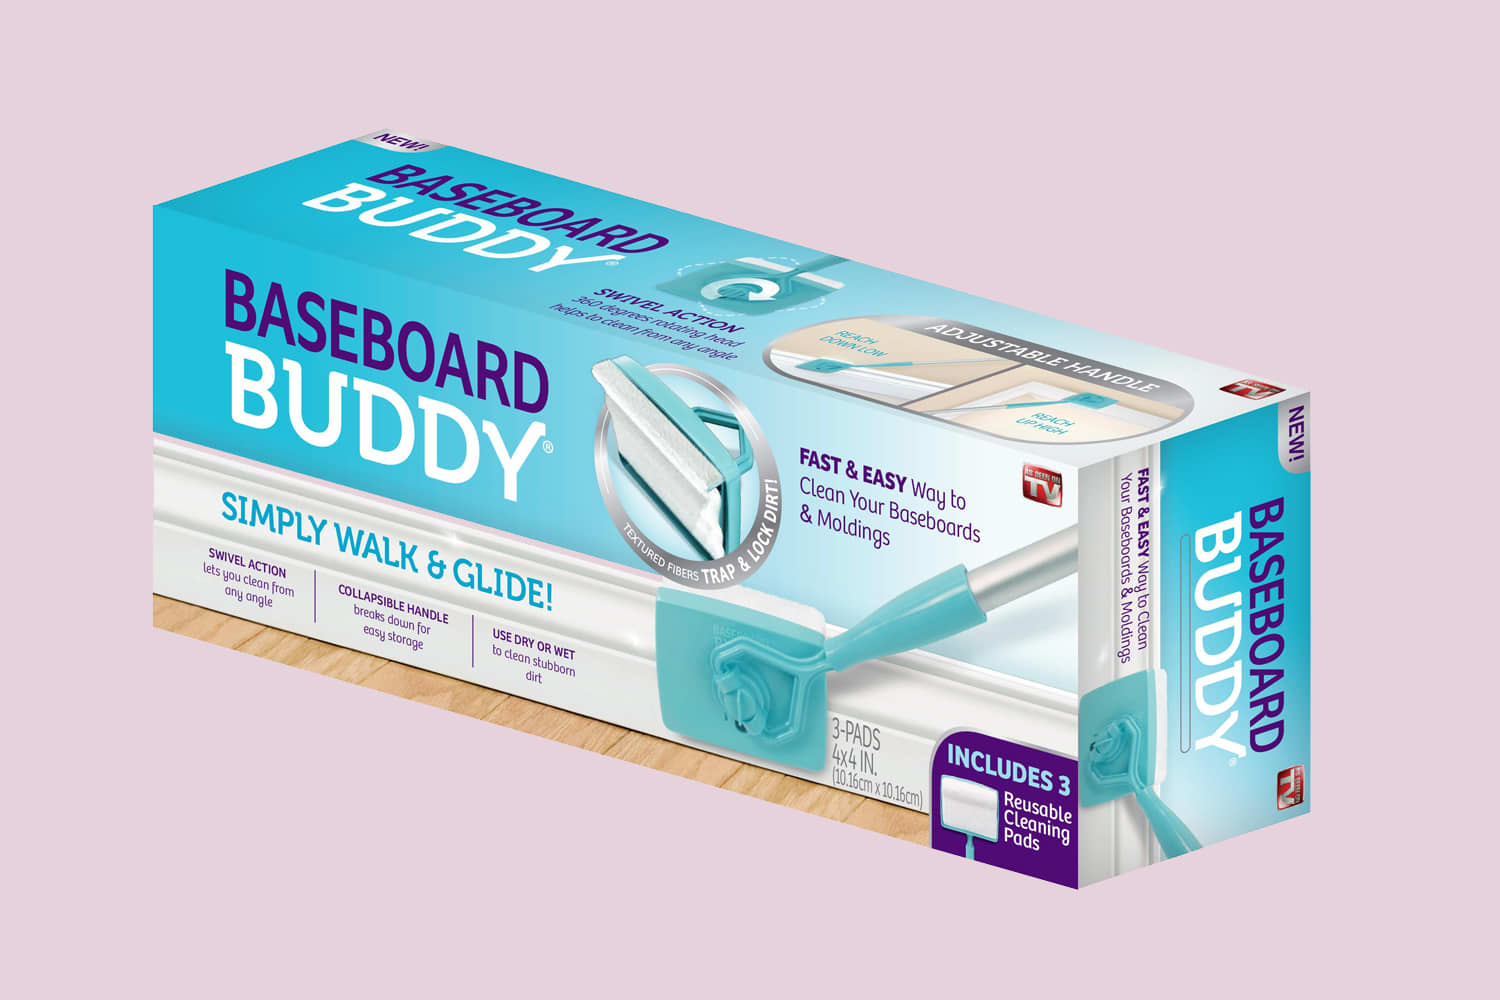 Baseboard Buddy Reviews: Does it Work? - Epic.Reviews